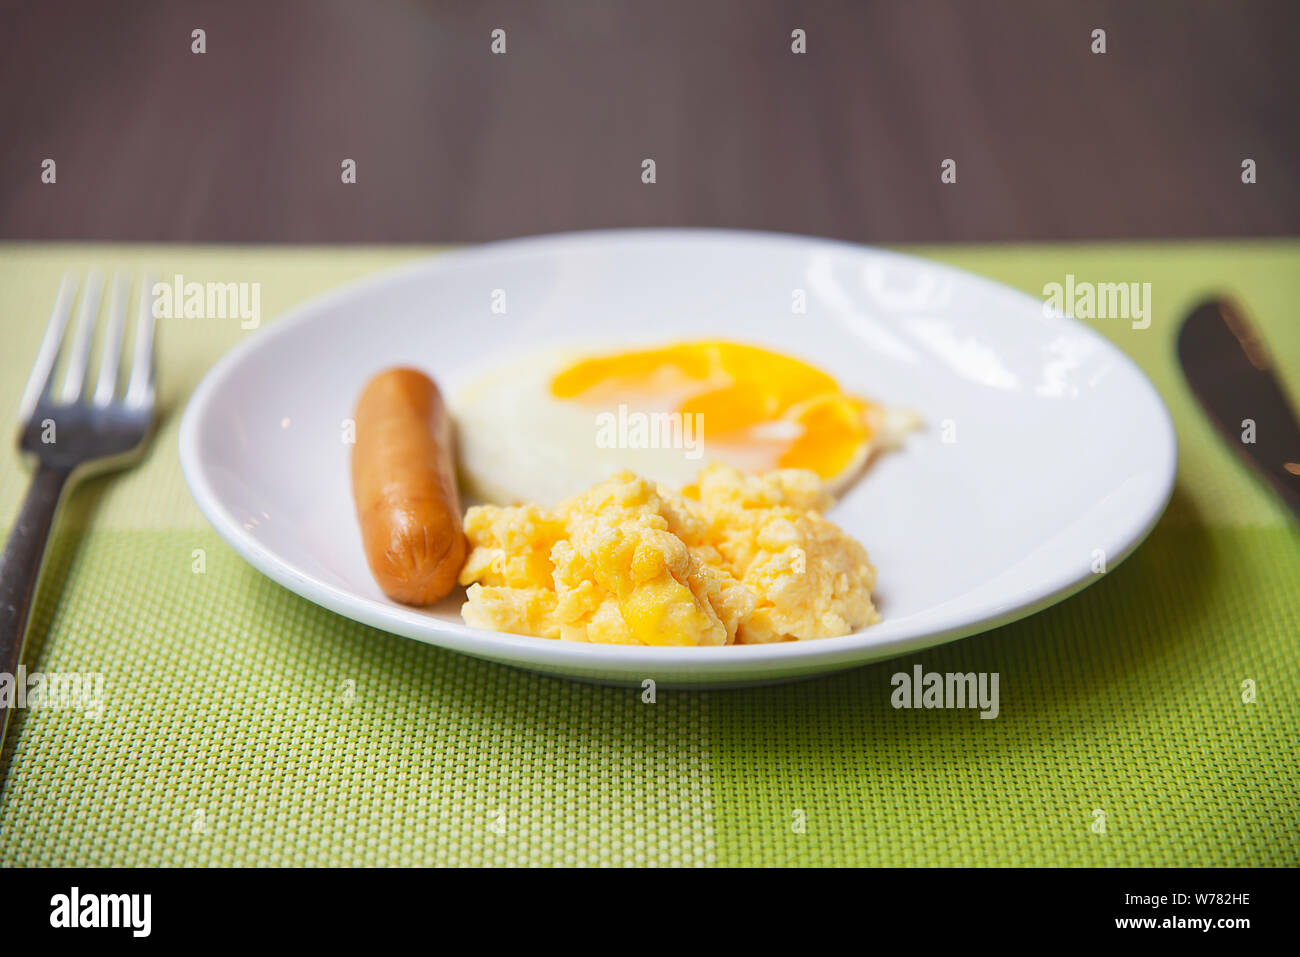 Sausage with egg breakfast set - breakfast food concept Stock Photo